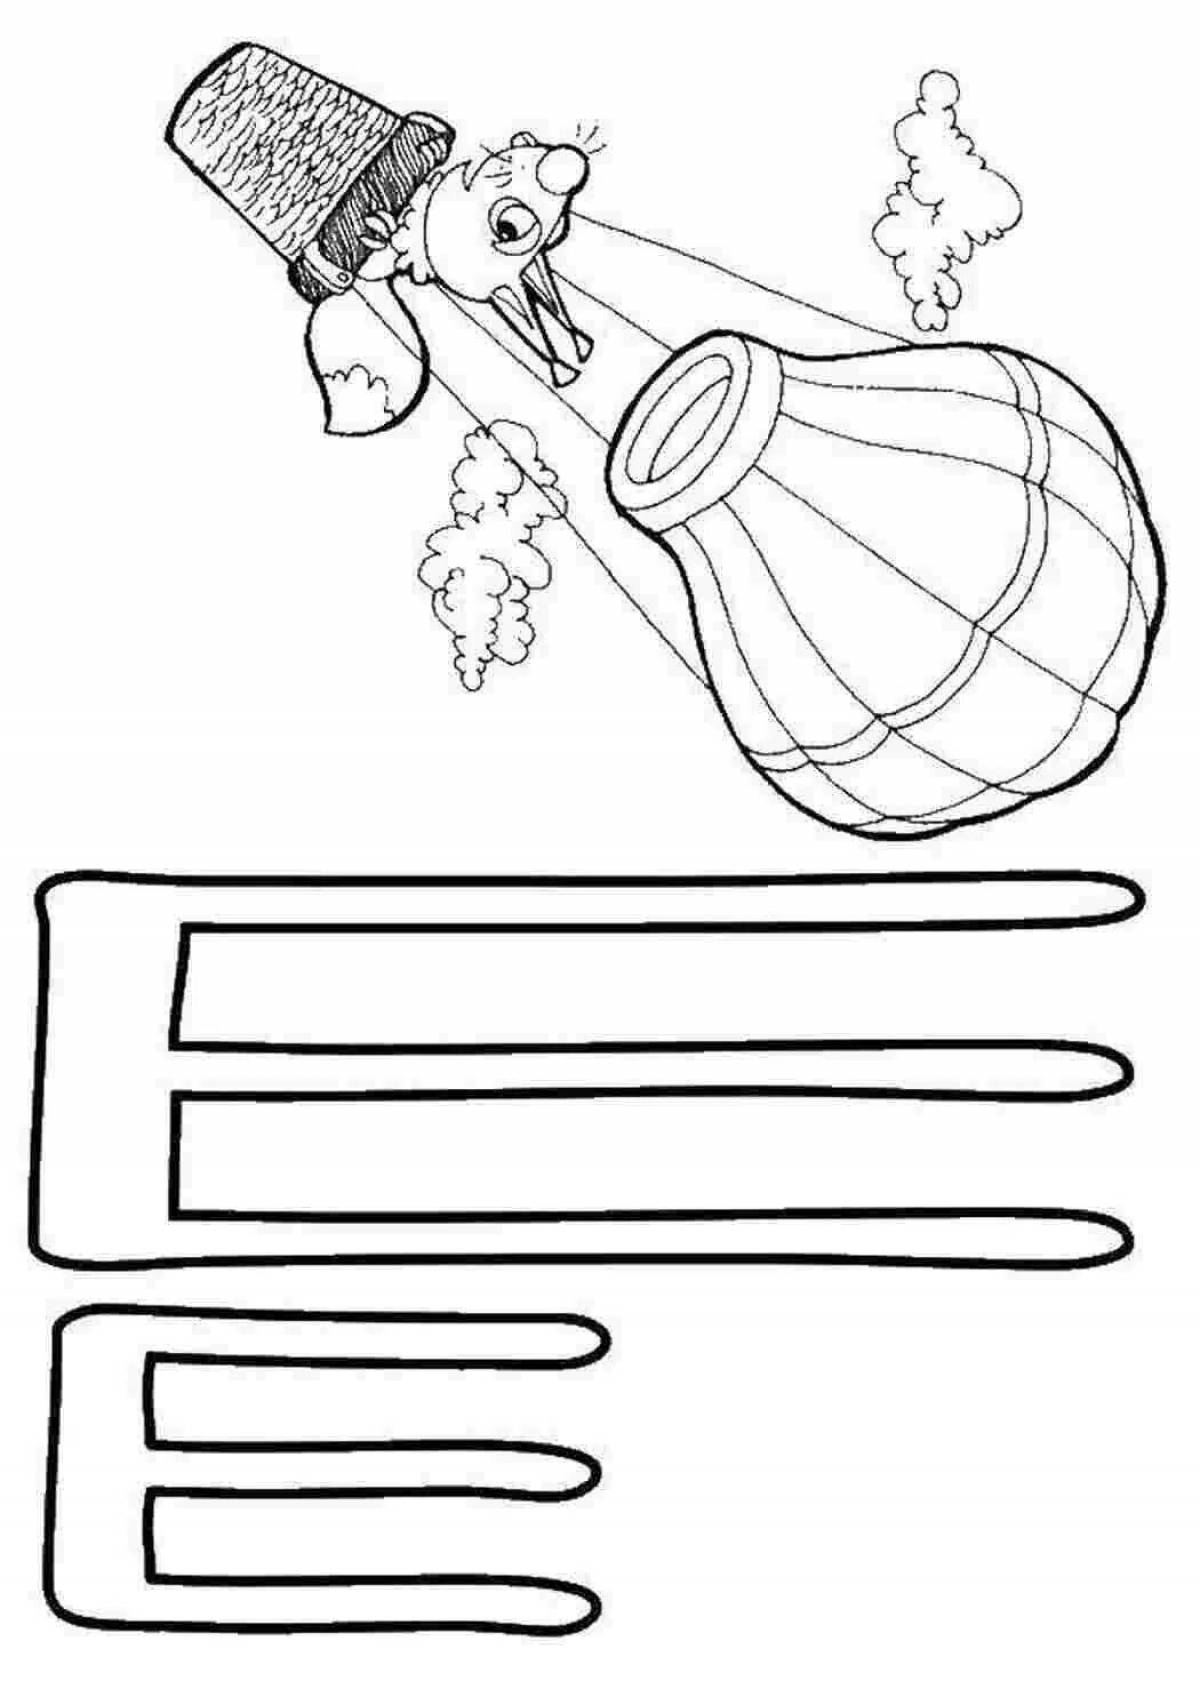 Coloring page playful letter w